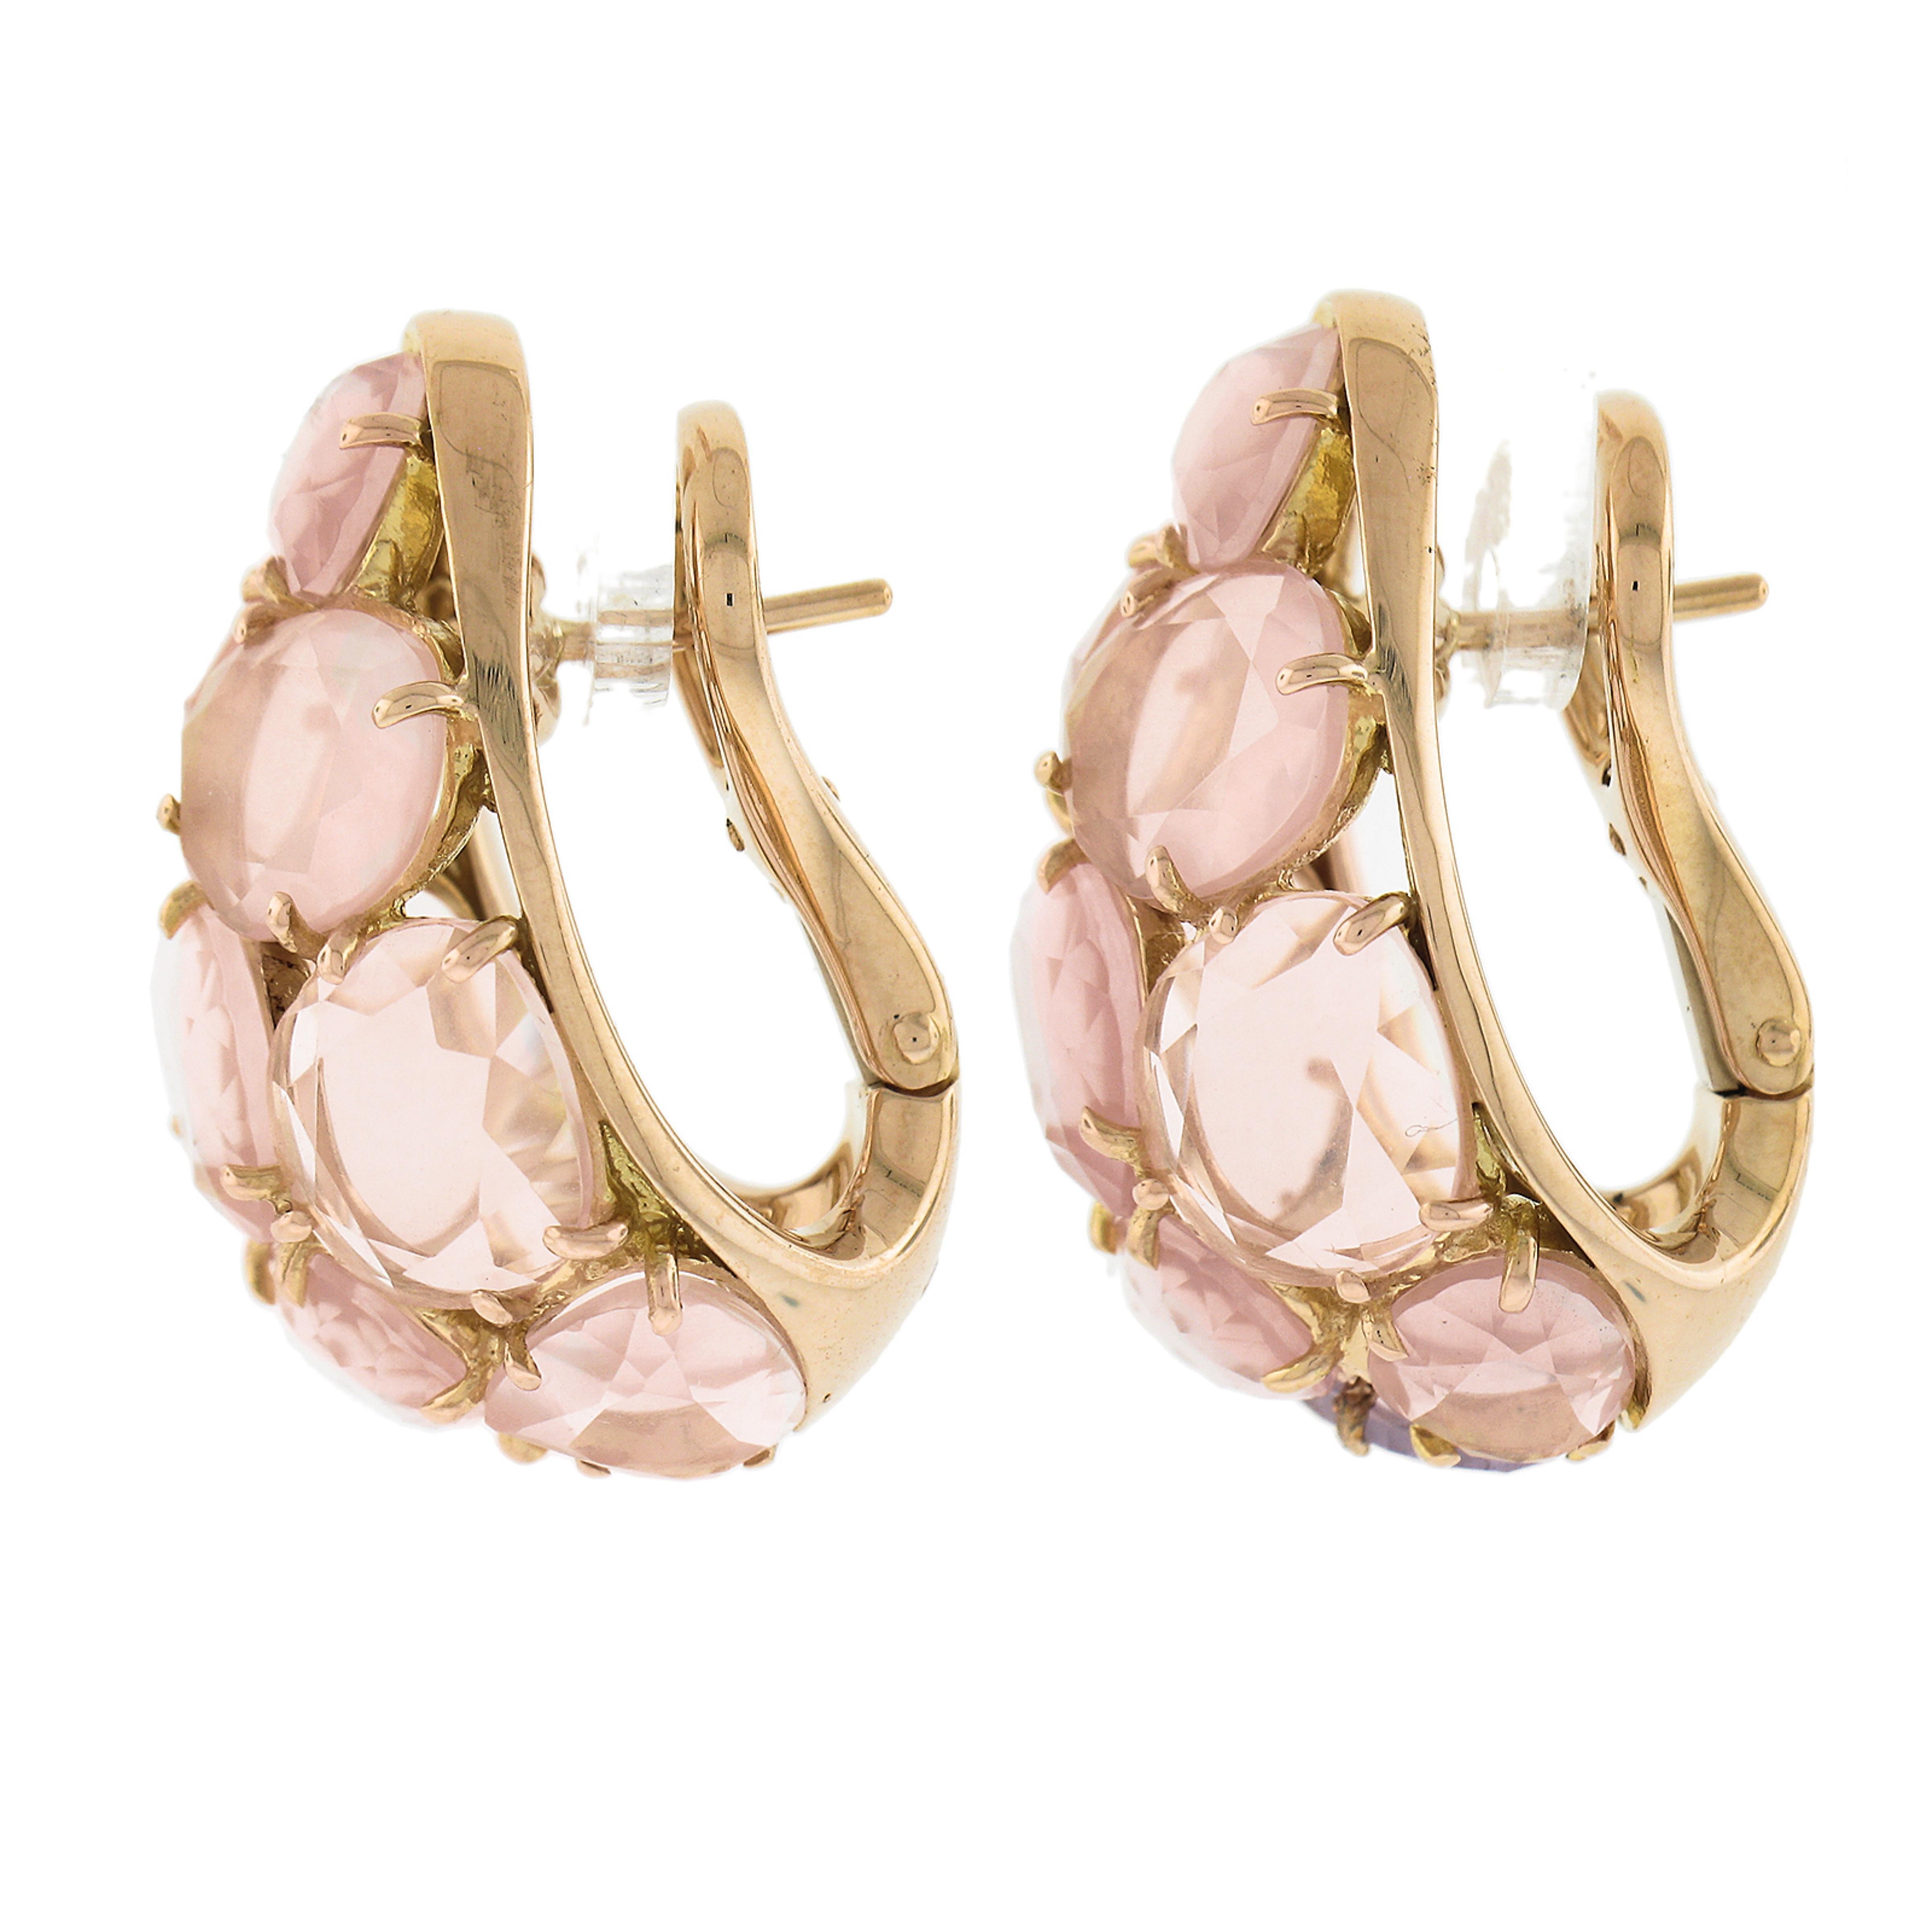 Pomellato 18k Rosy Yellow Gold Rose Quartz Mosaic Cuff Bombe Omega Earrings In Excellent Condition For Sale In Montclair, NJ